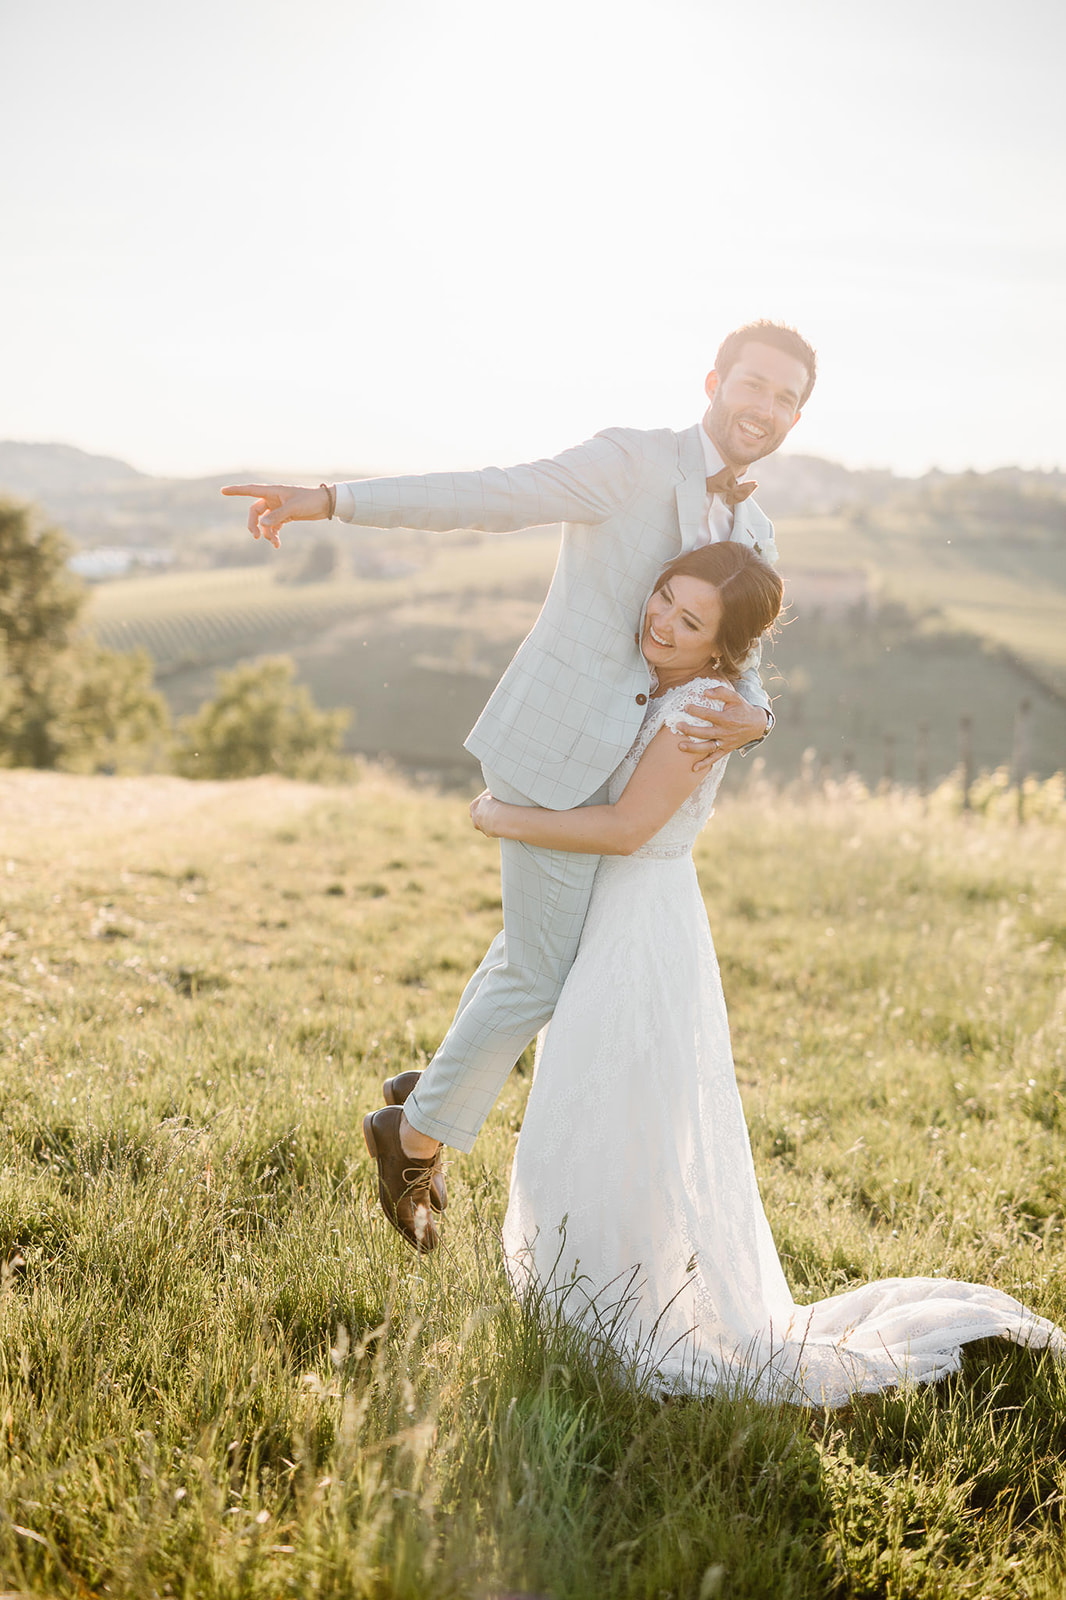 bride and groom having fun during their wedding photo shoot in Italy